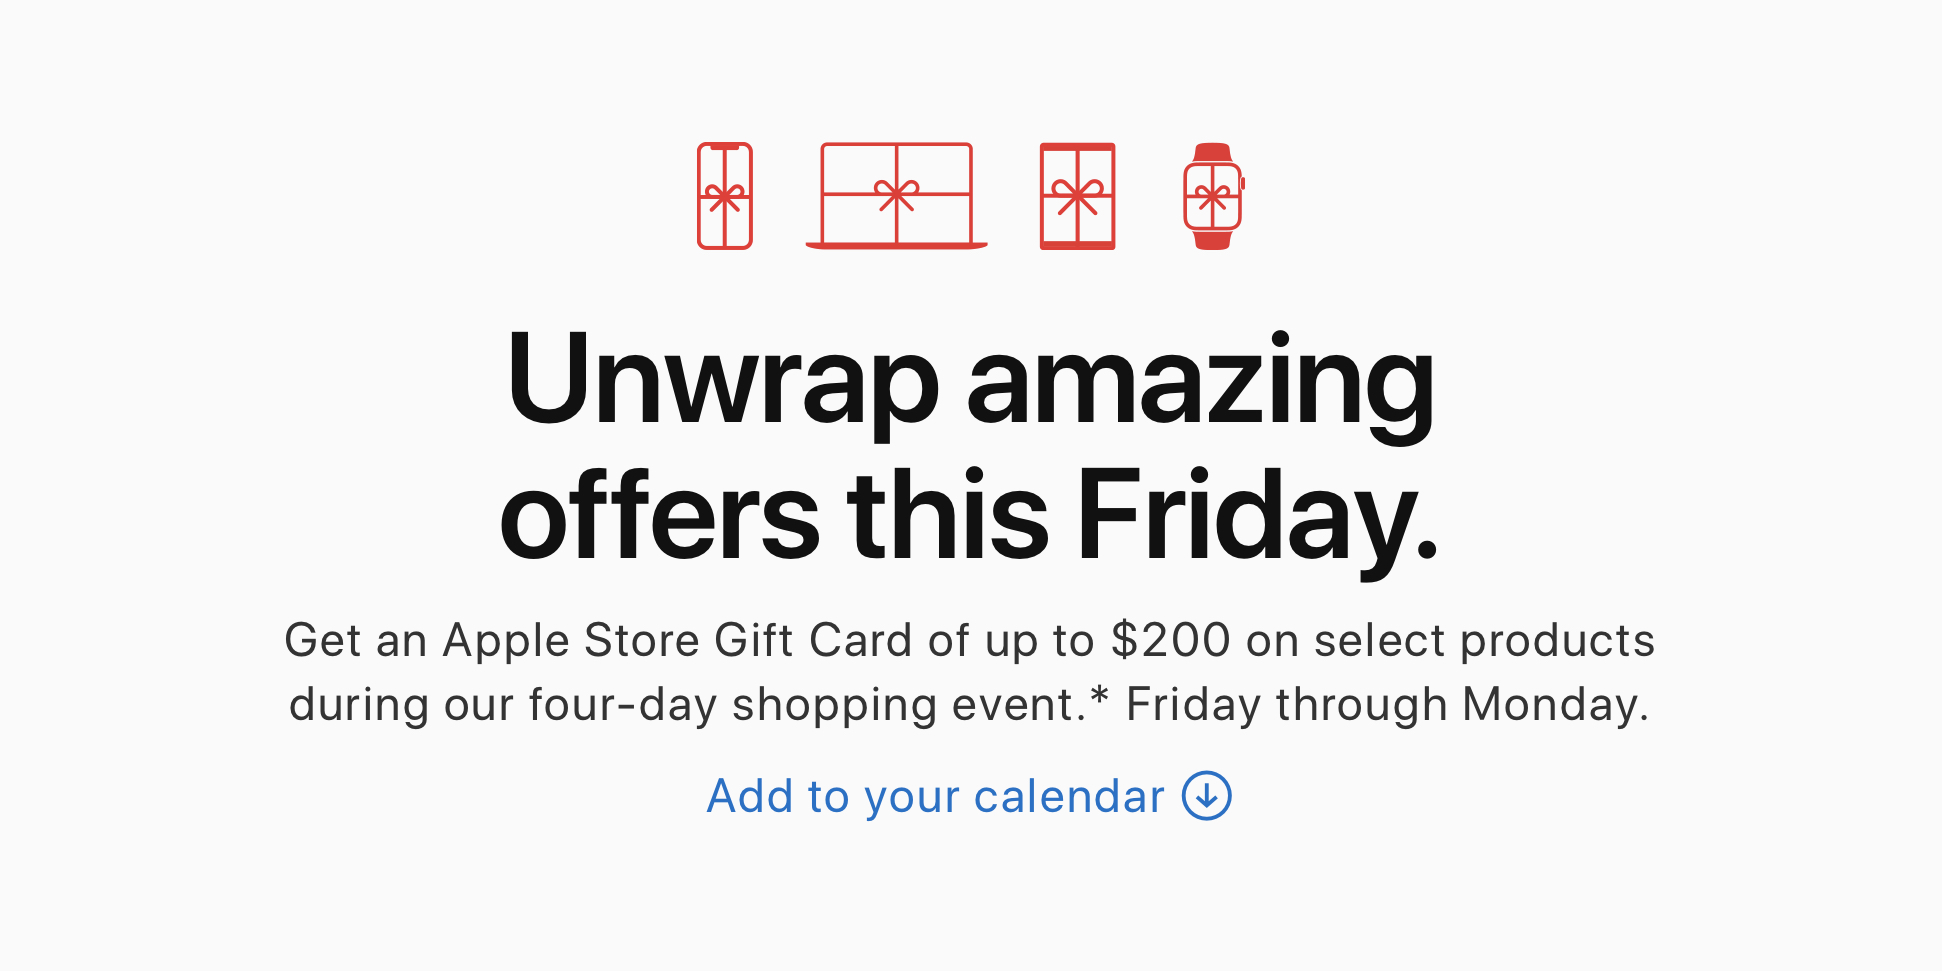 Apple announces its Black Friday deals: up to $200 Apple Store gift card with device purchase ...